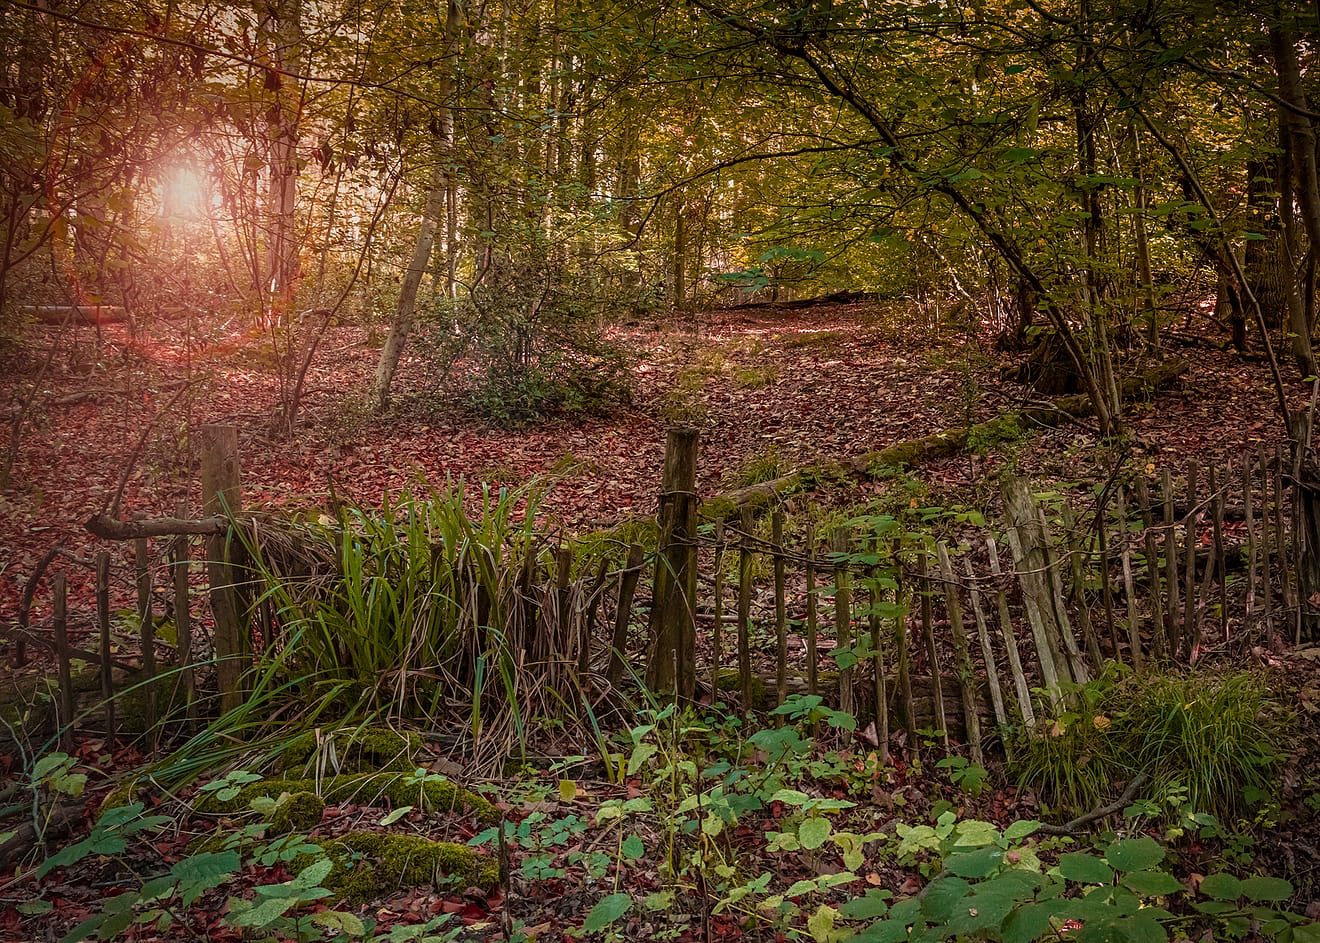 Captivating Autumn Landscapes in North Hampshire, England